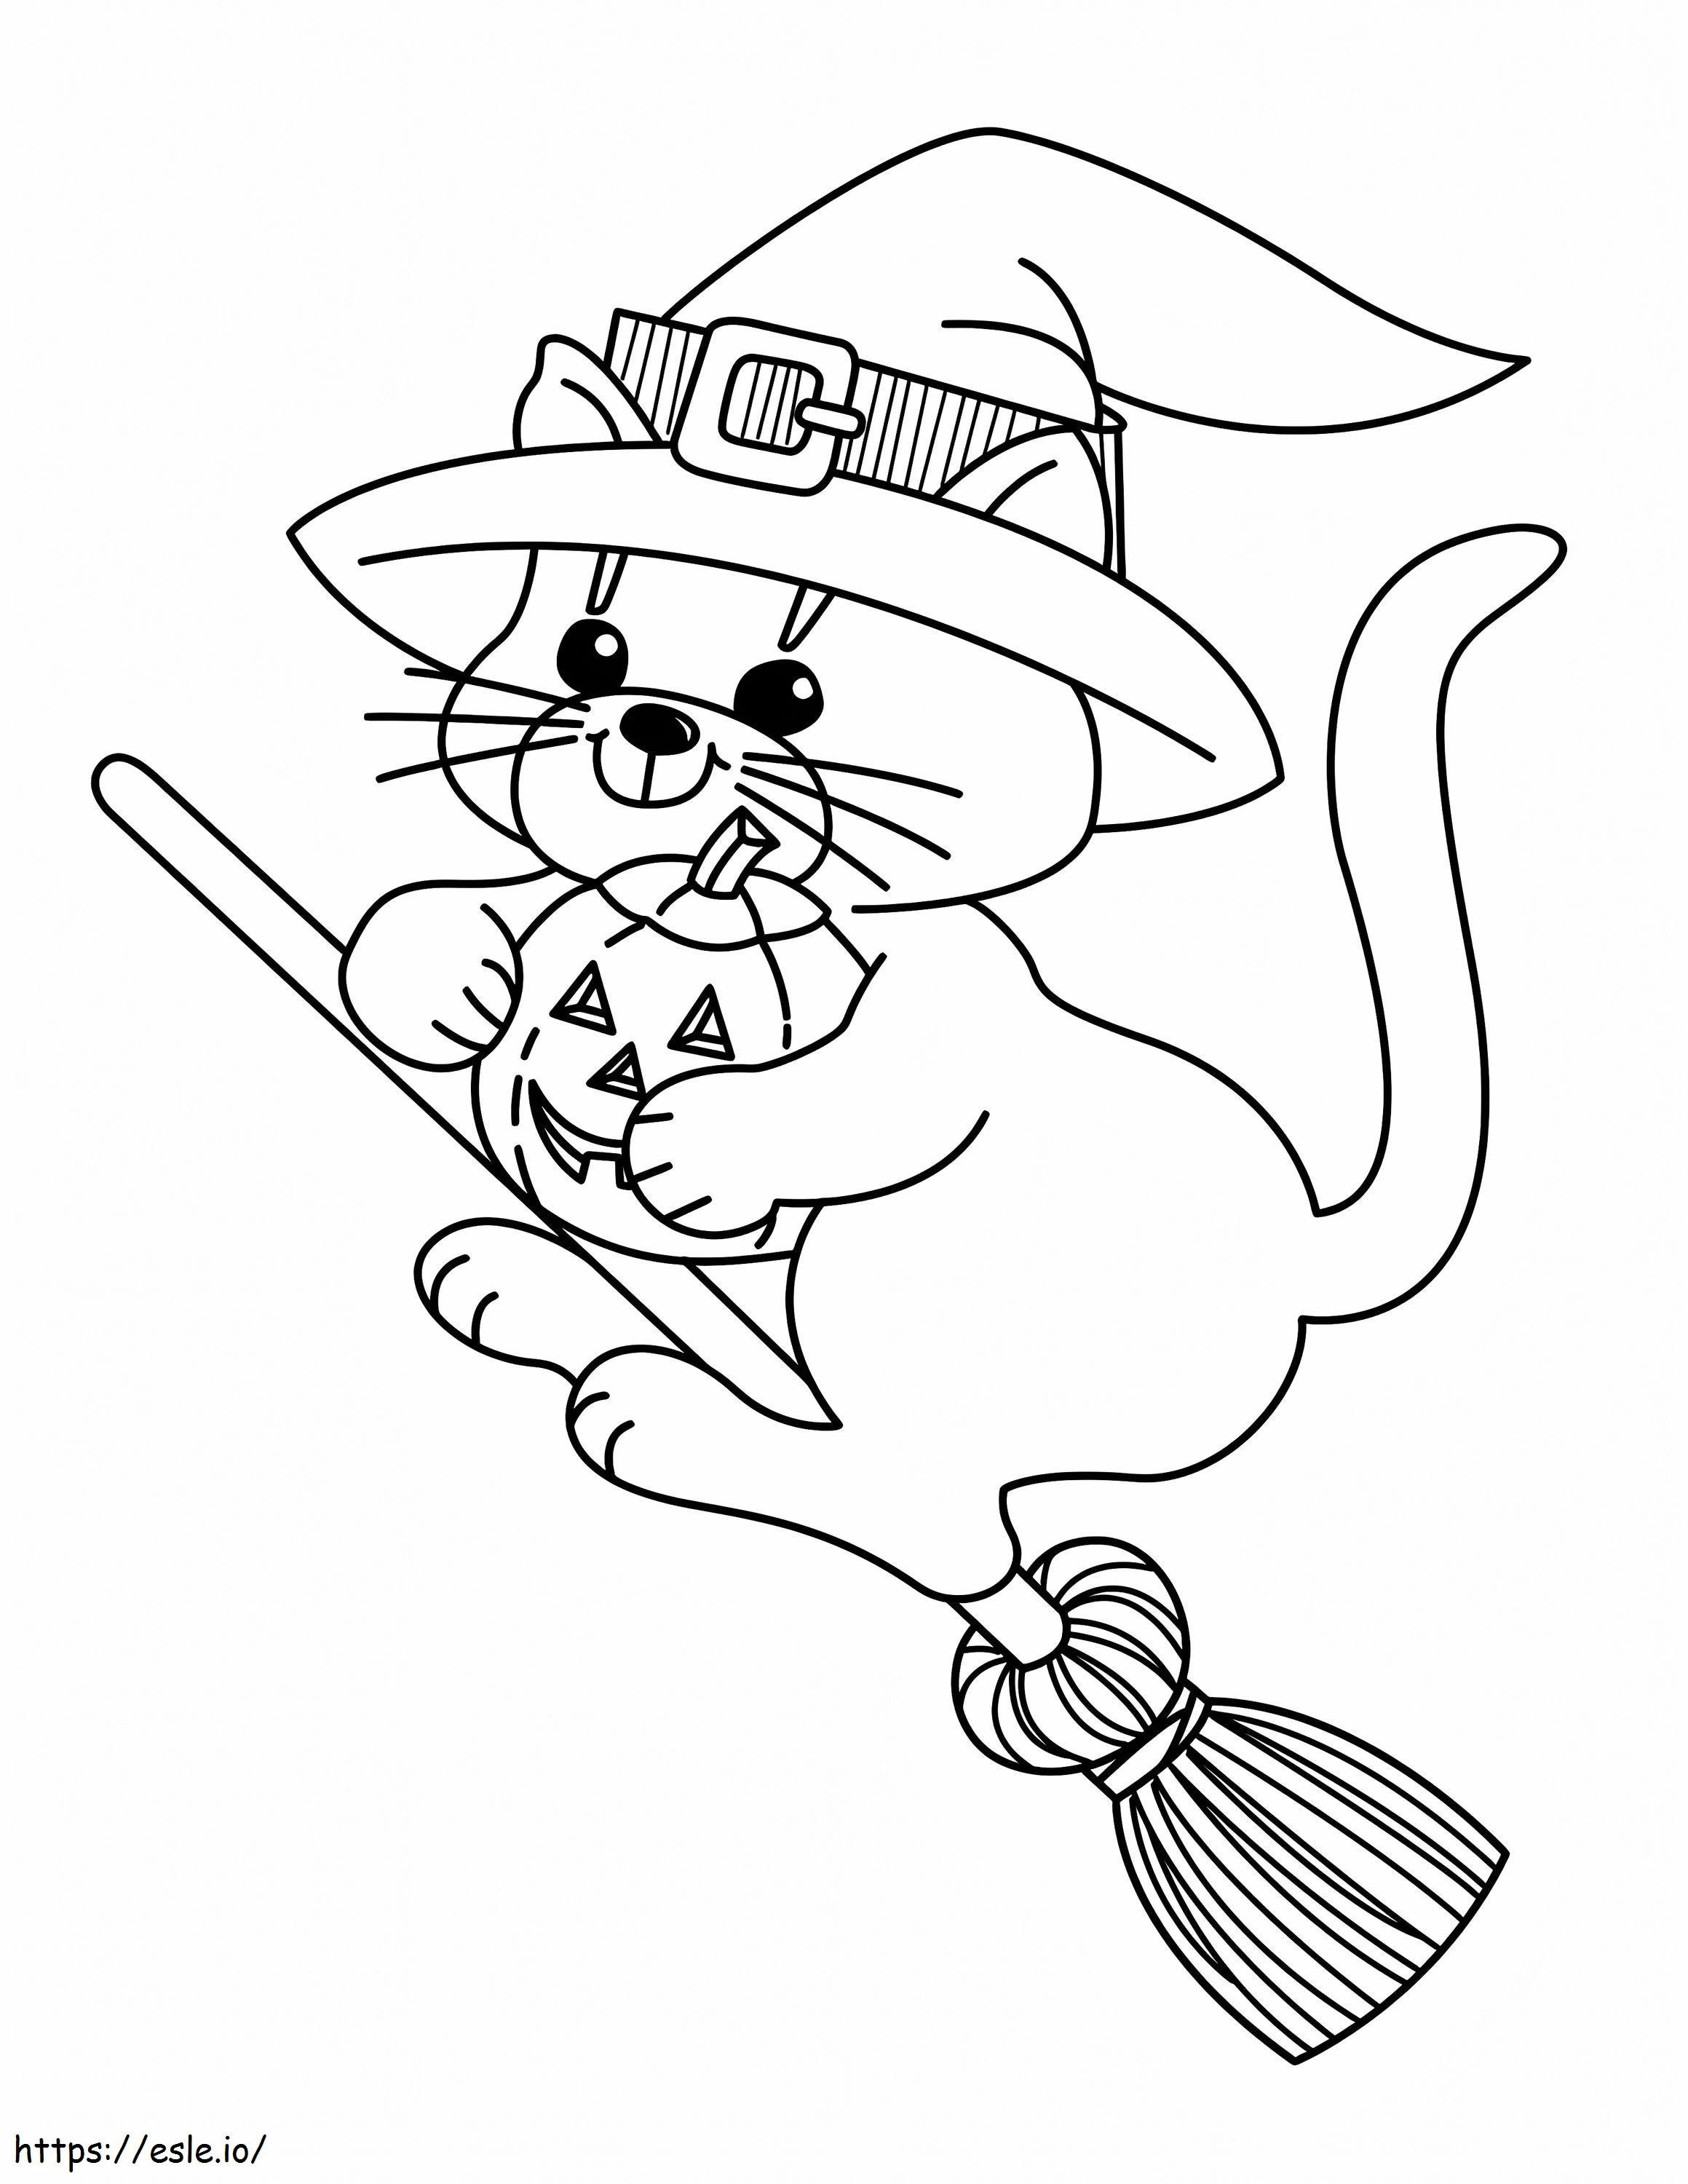 1539741749 Cat 1 O Halloween Cat coloring page